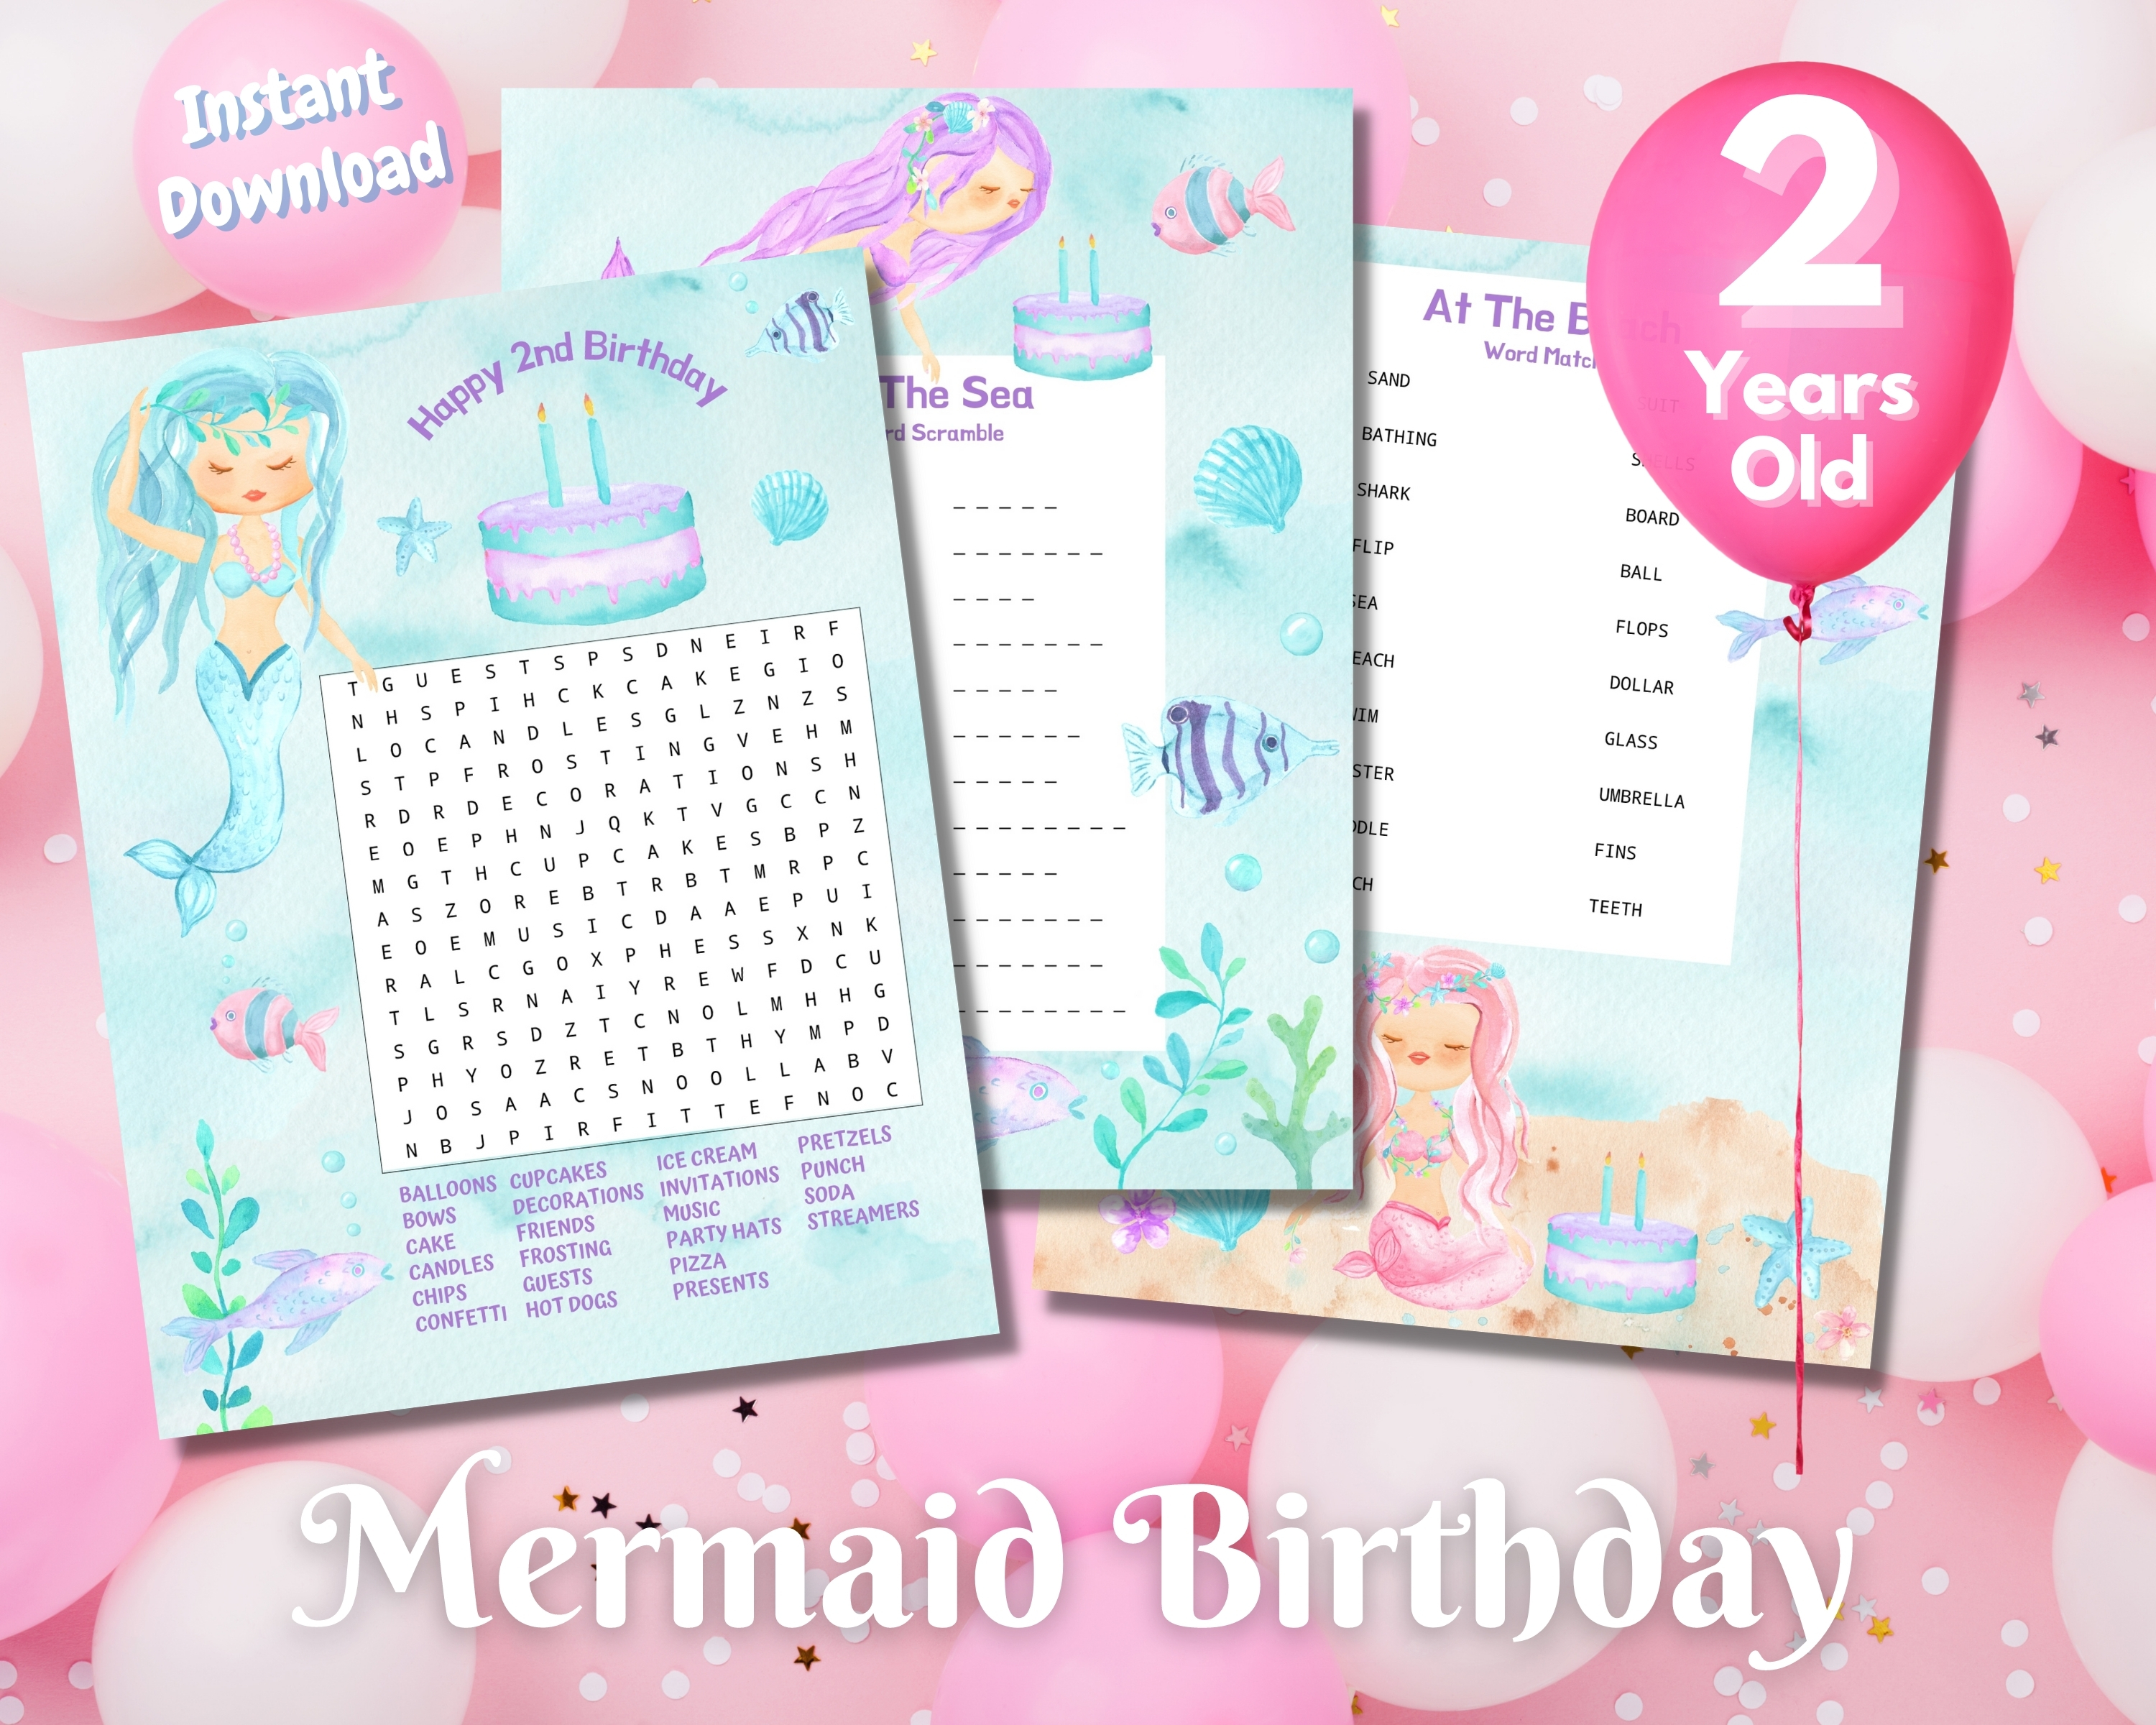 Second Mermaid Birthday Word Puzzles - Light Complexion